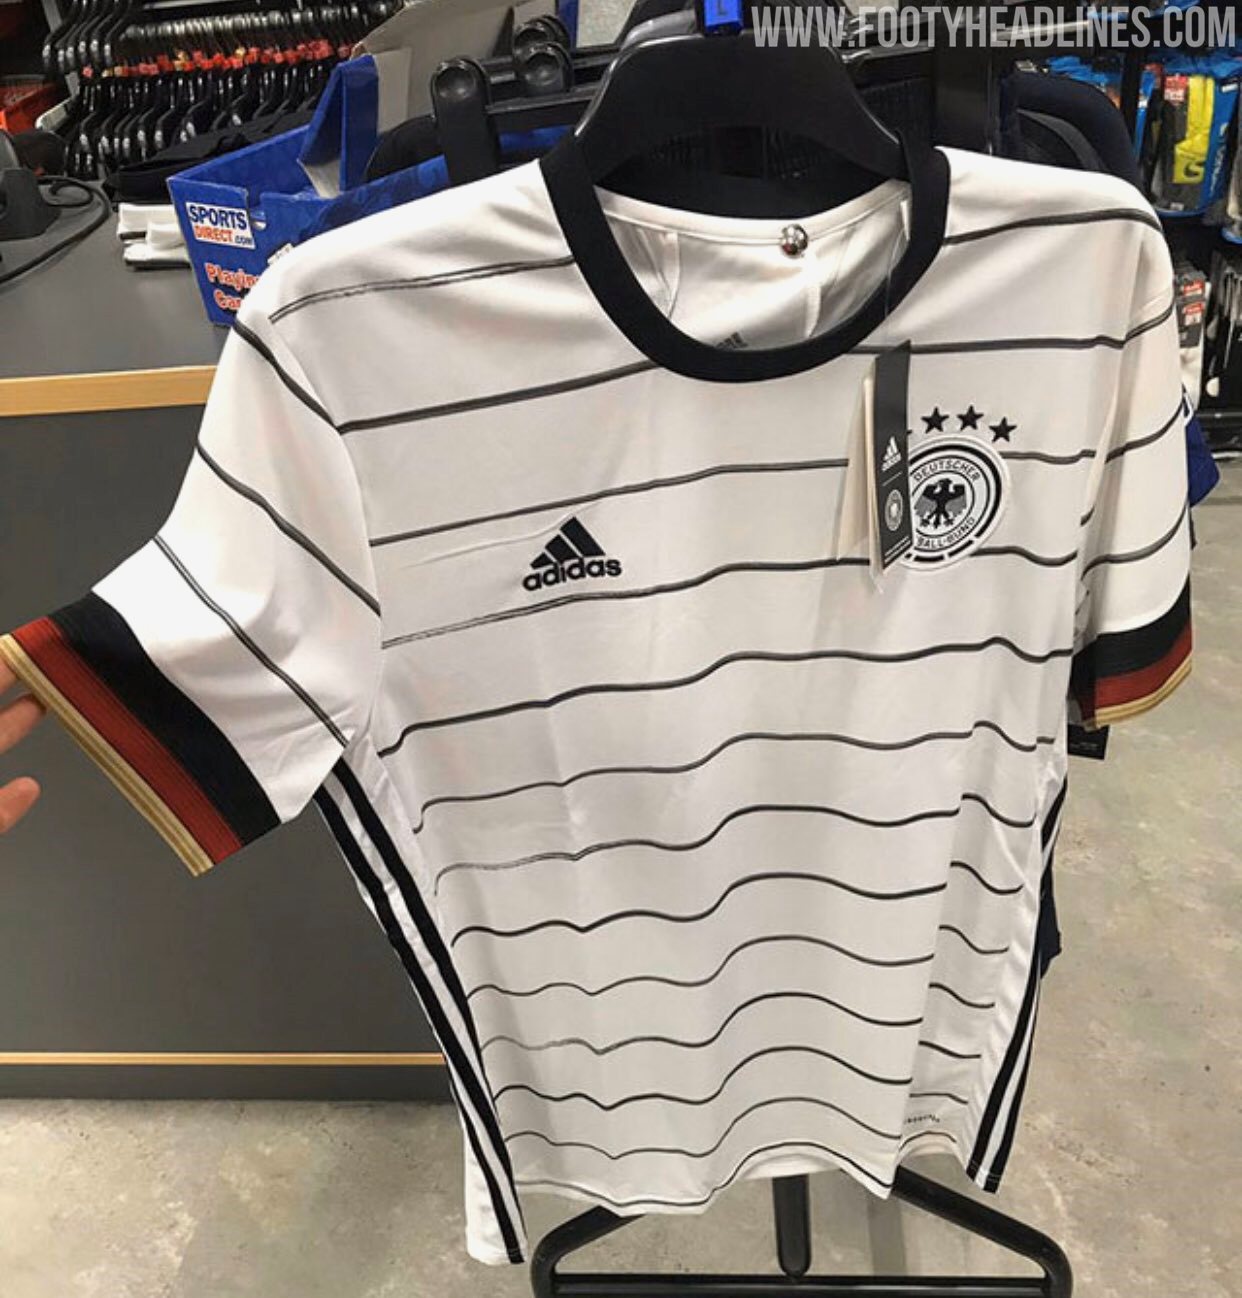 Germany's iconic jerseys through the years